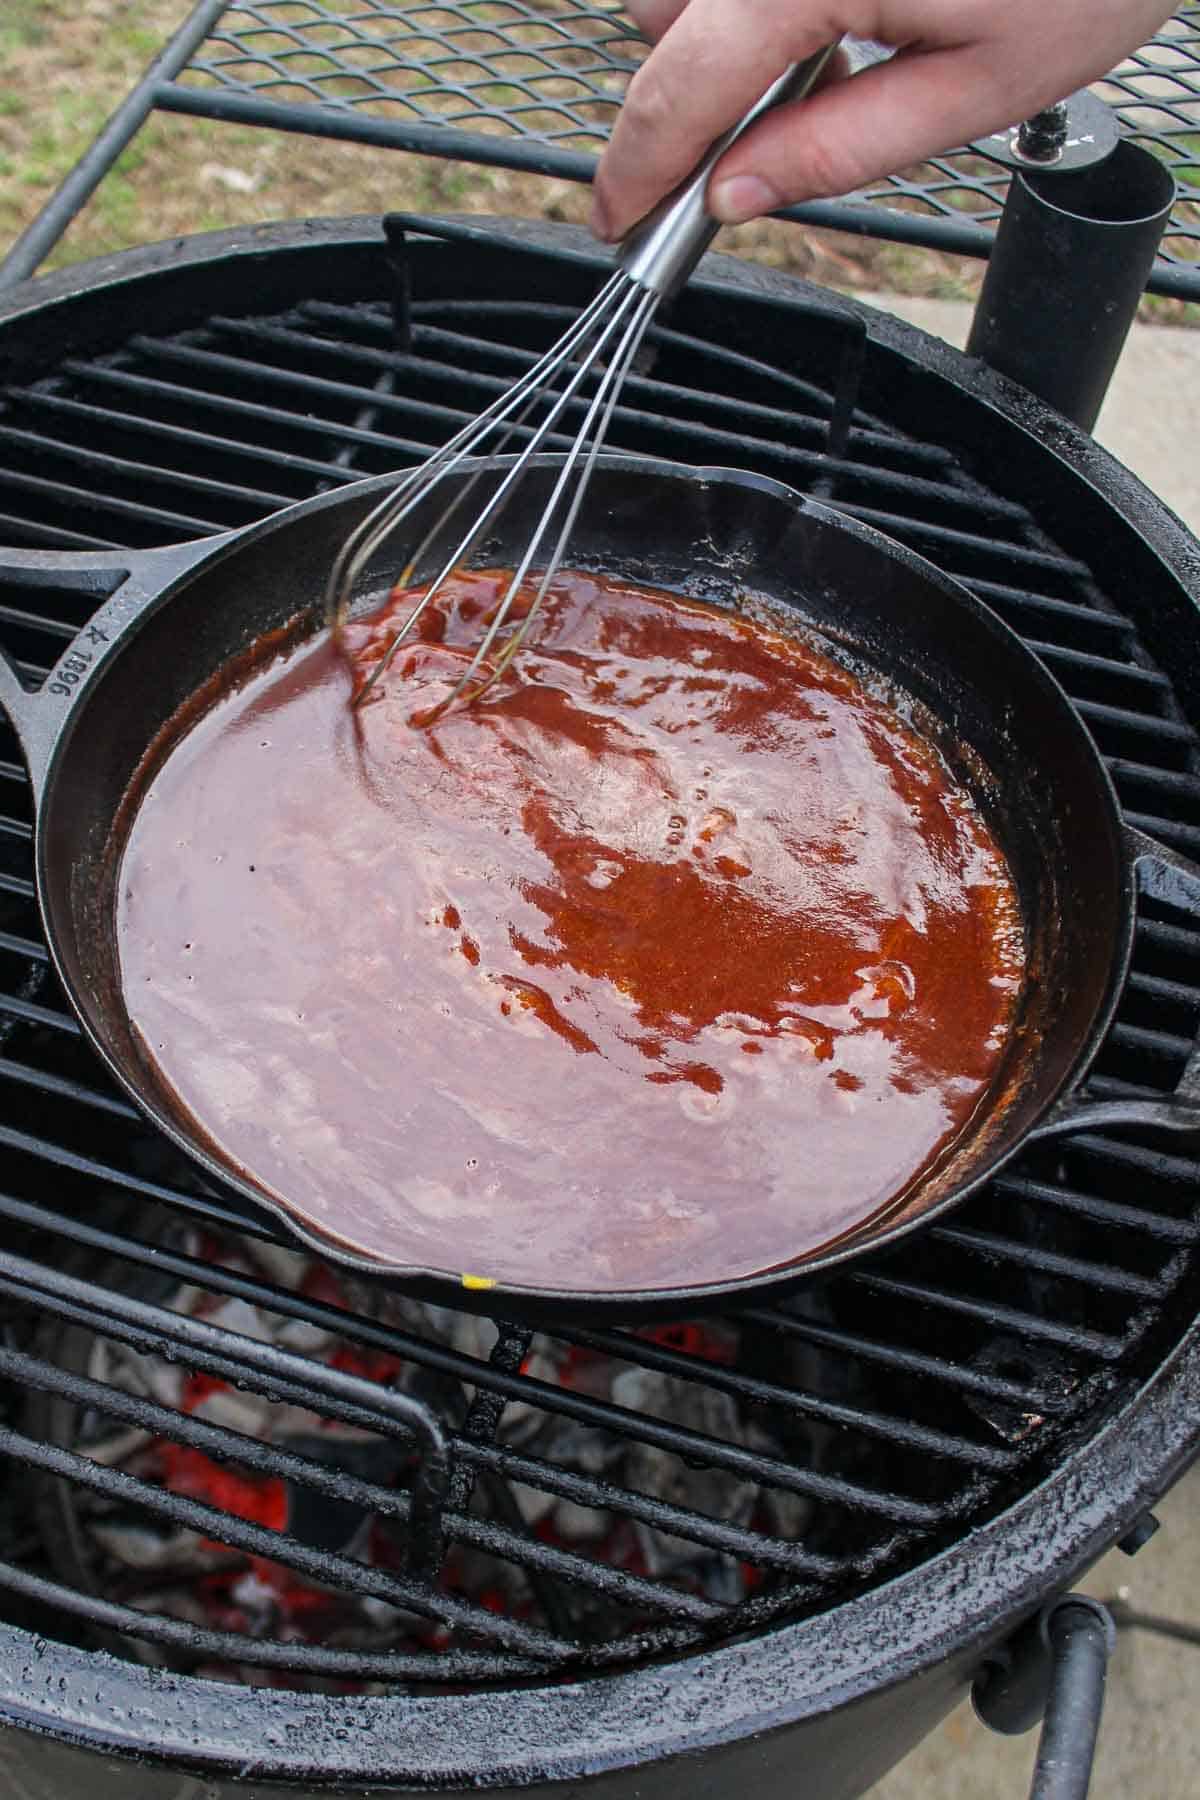 Mixing together the bourbon glaze.